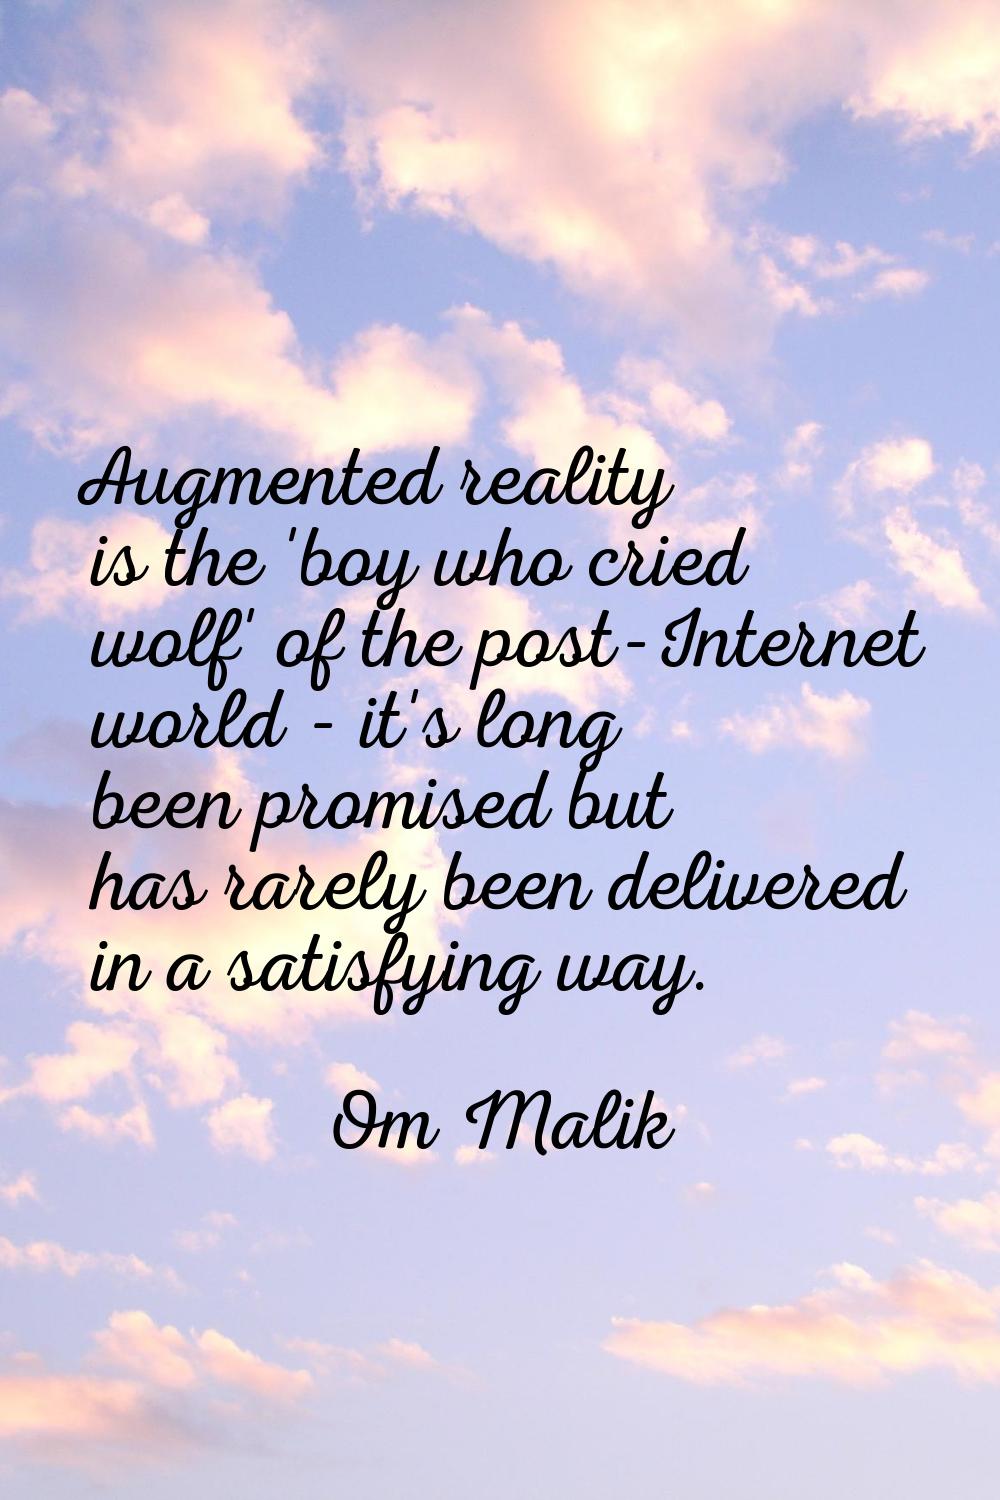 Augmented reality is the 'boy who cried wolf' of the post-Internet world - it's long been promised 